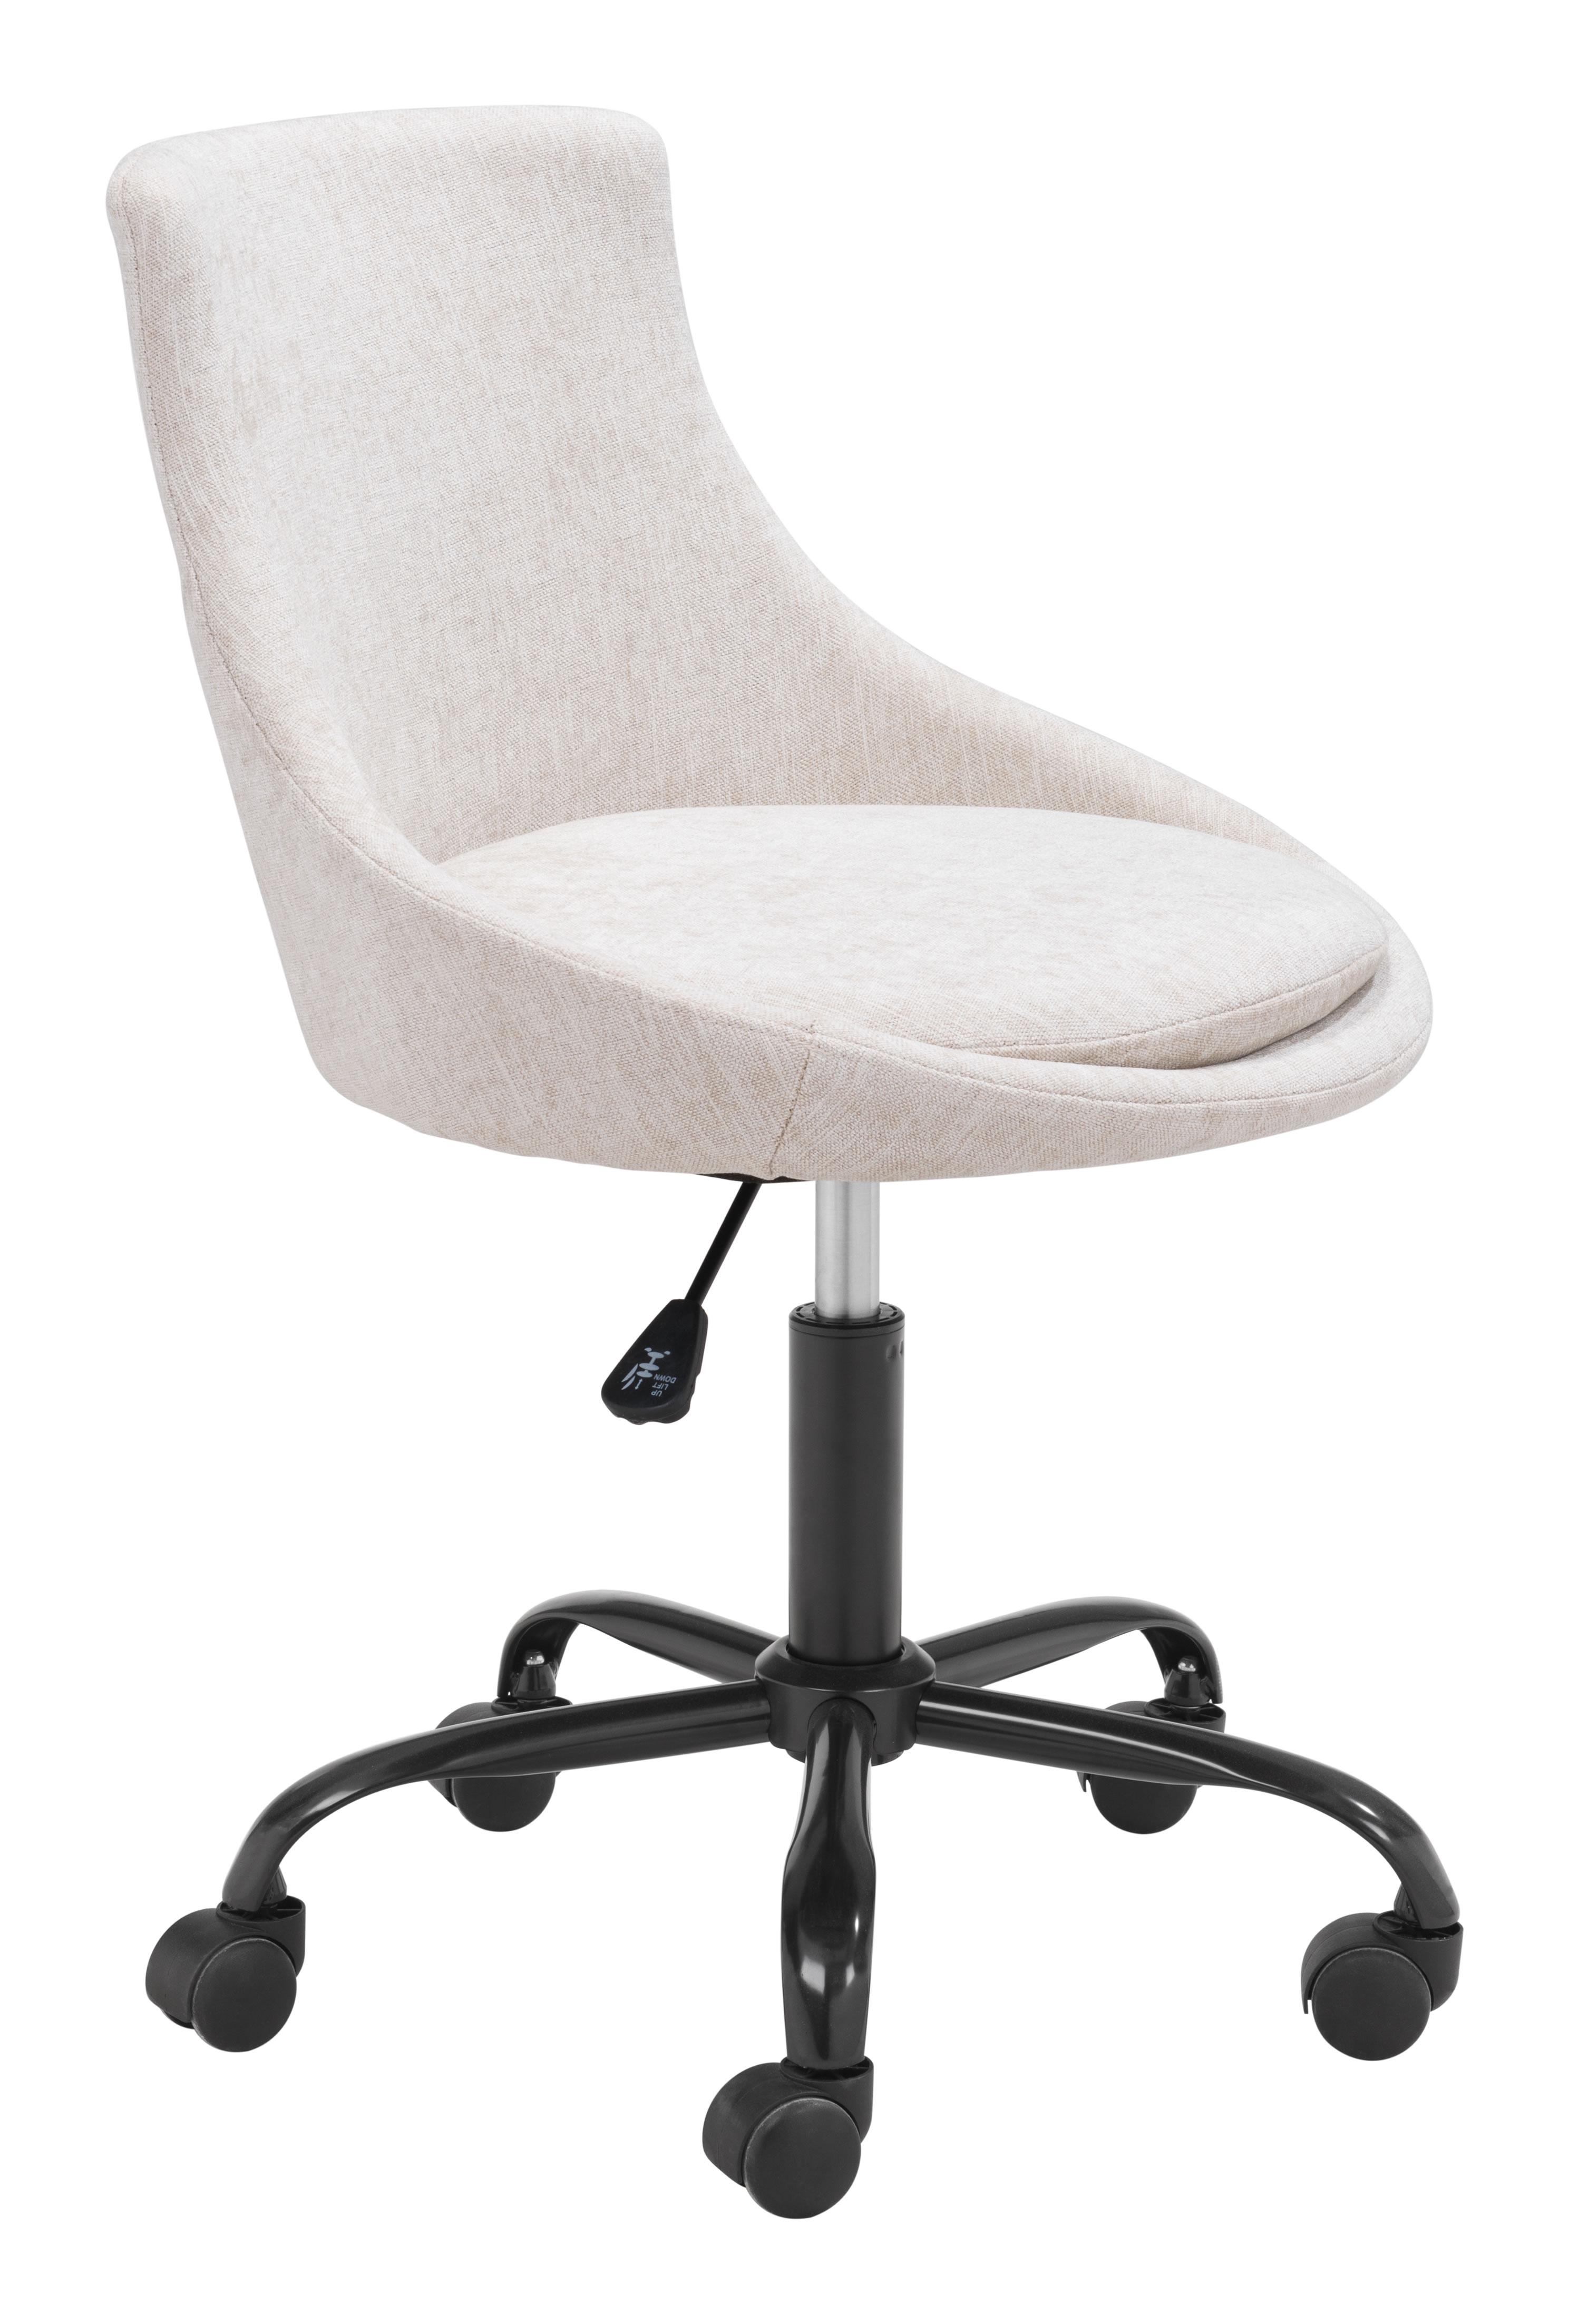 Maury Office Chair, Beige - Image 1